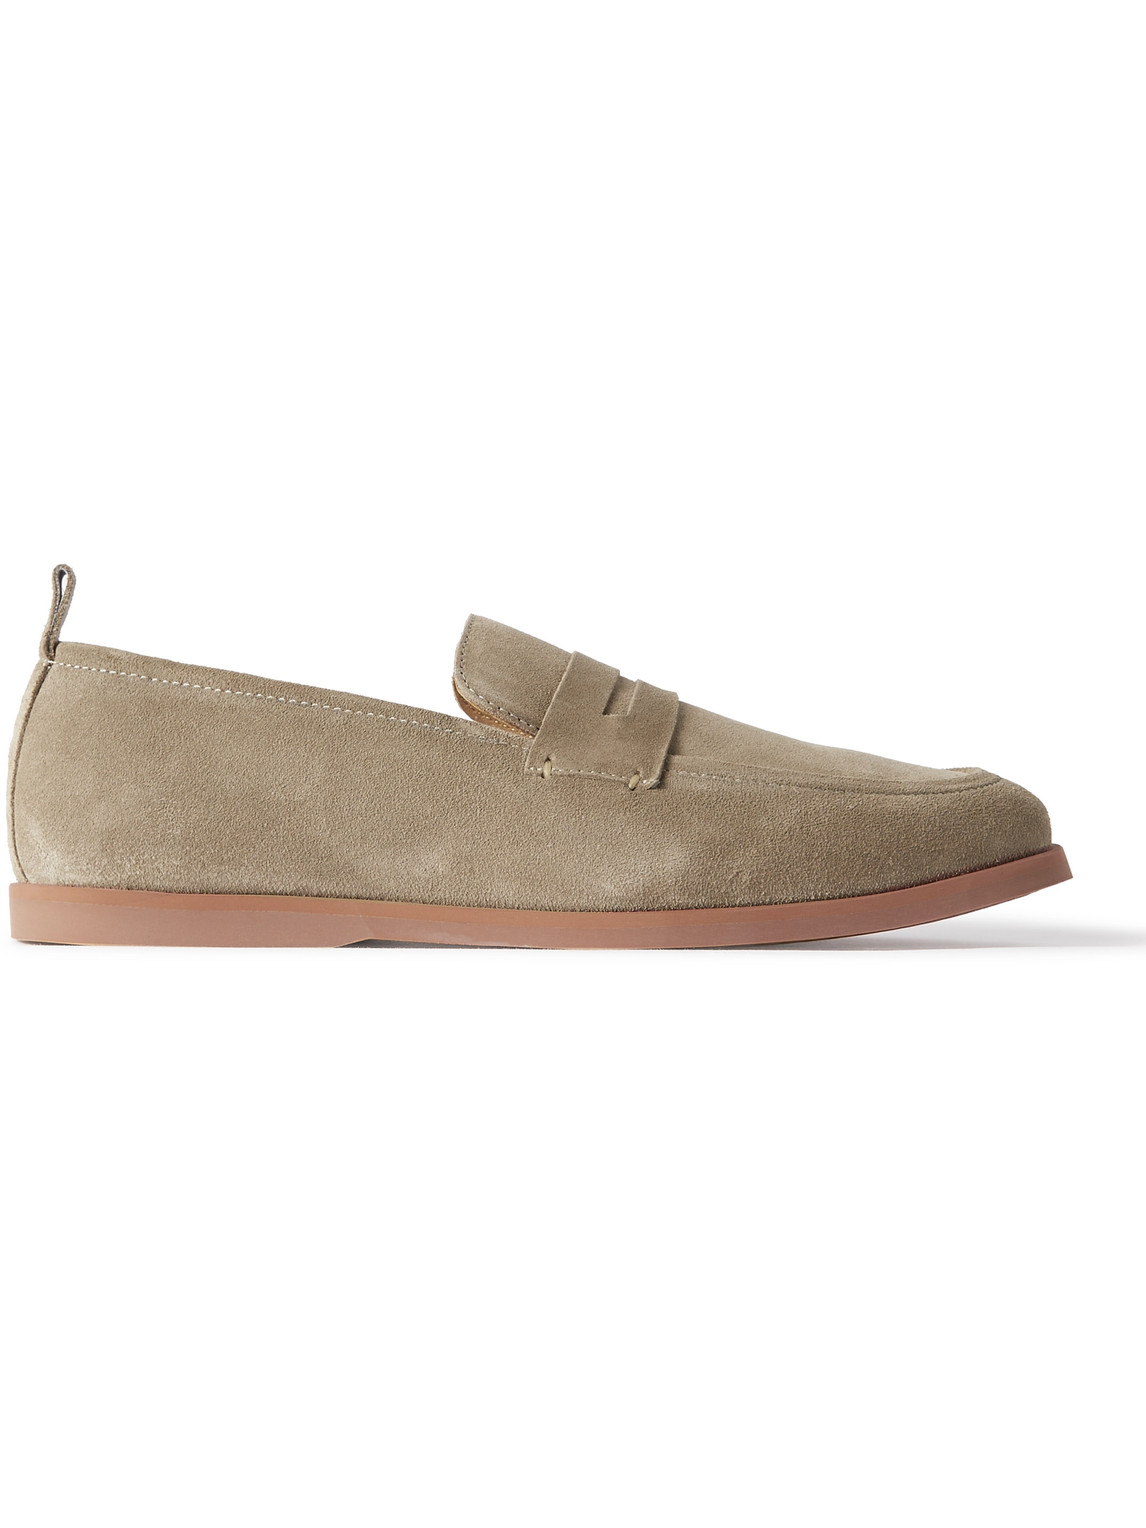 Mr P. Leo Suede Penny Loafers In Neutrals